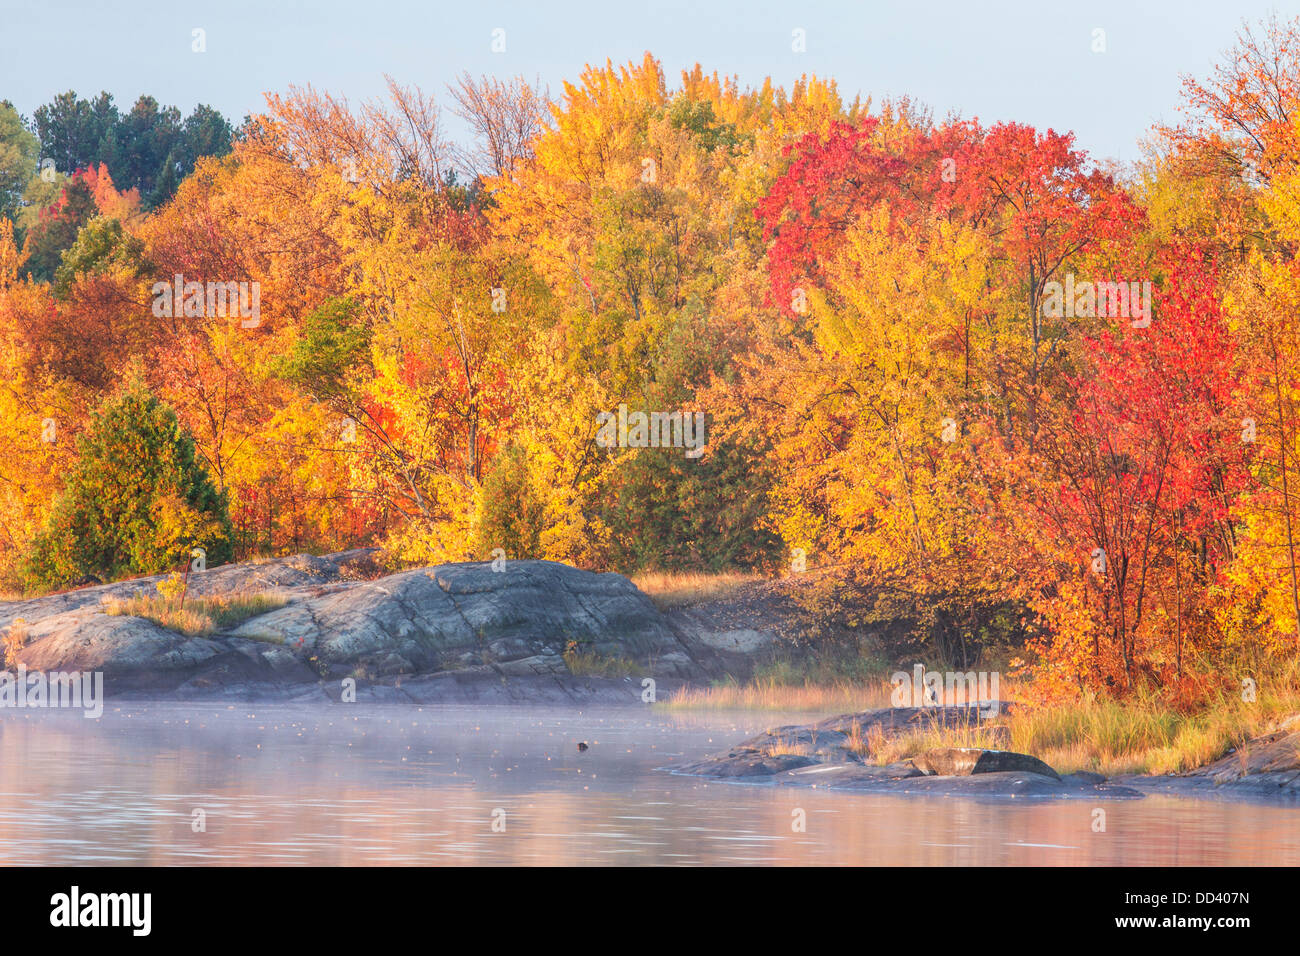 A Great Blue Heron stands on a rock on an autumn morning along the Vermilion River, Whitefish, City of Greater Sudbury, Ontario. Stock Photo